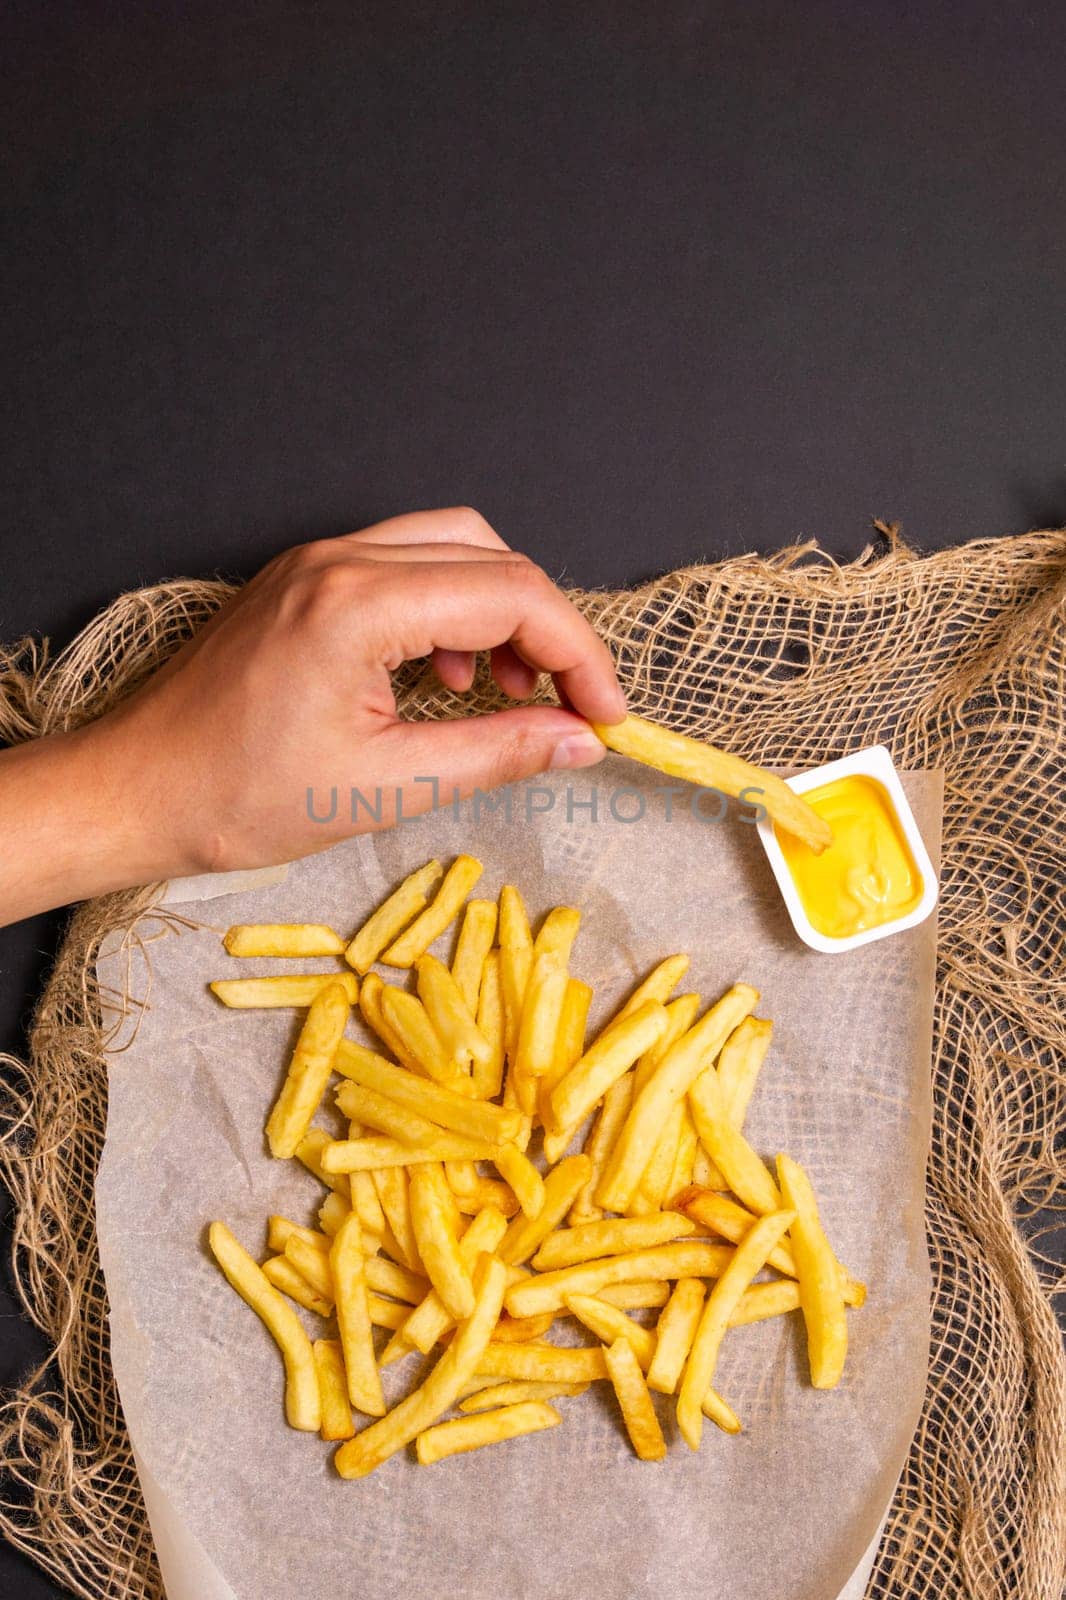 Appetizing Encounter With Golden French Fries and Creamy Mustard Sauce